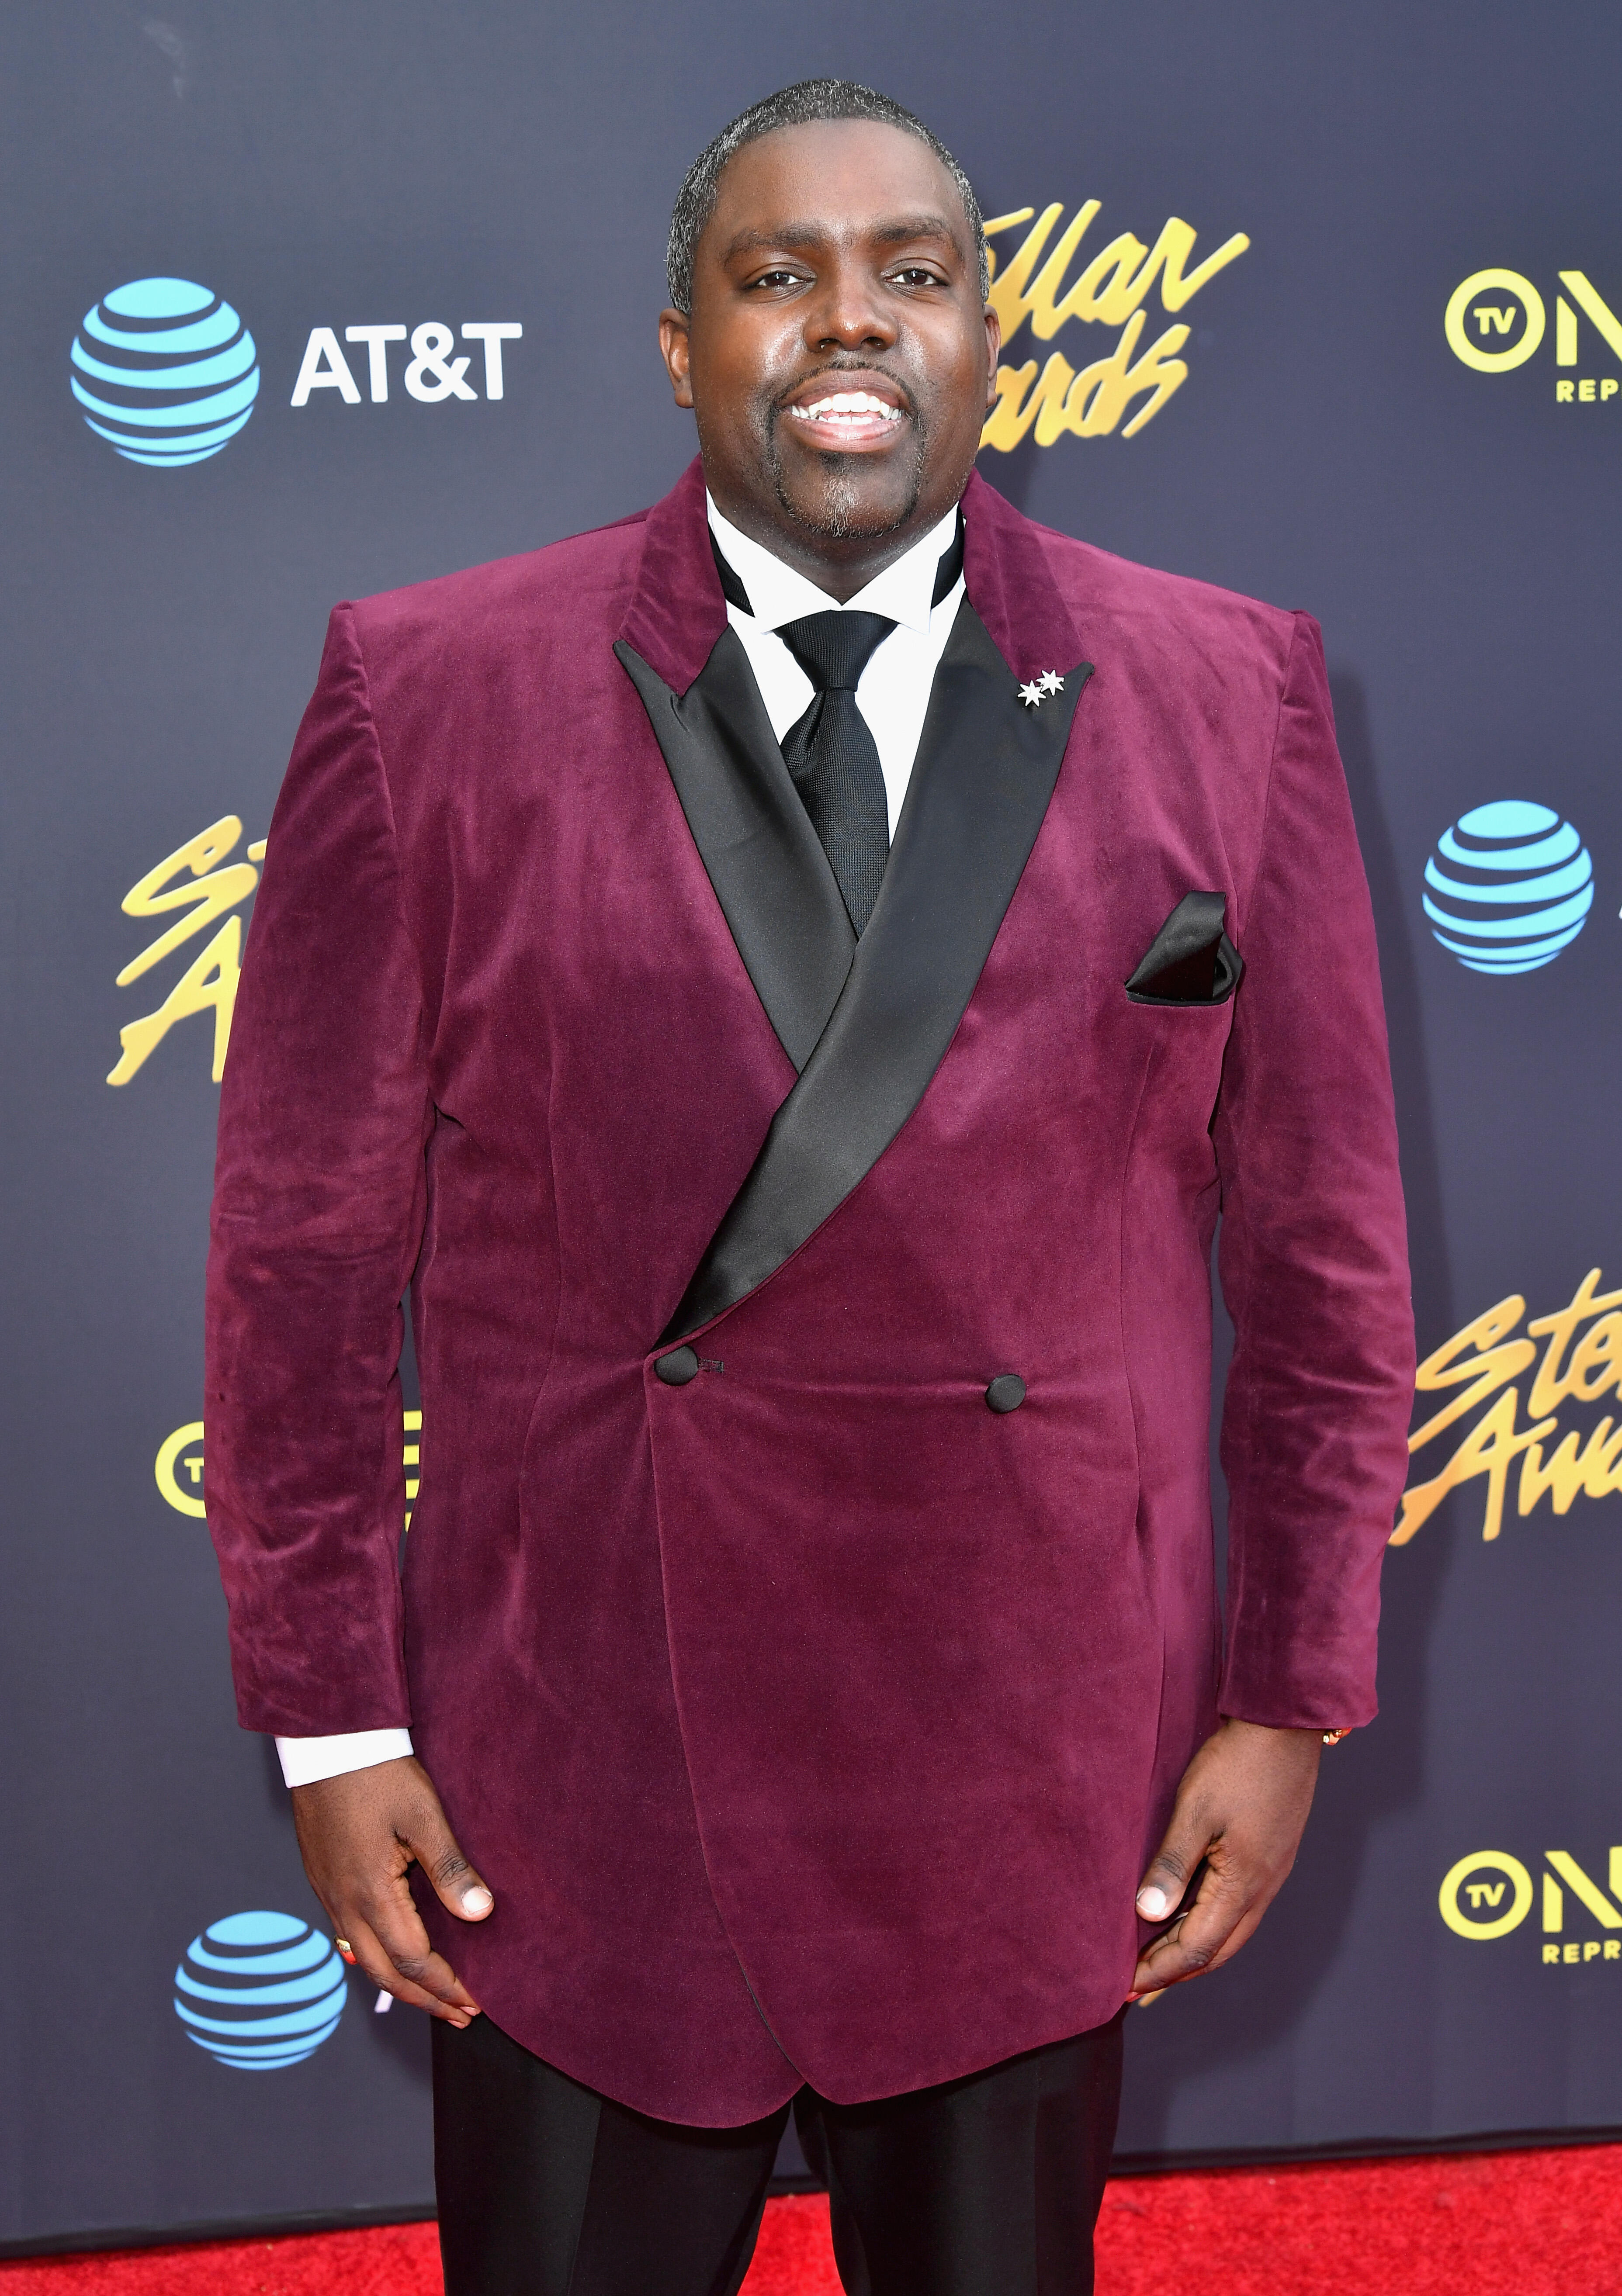 LAS VEGAS, NV - MARCH 25:  Nominee William McDowell arrives at the 32nd annual Stellar Gospel Music Awards at the Orleans Arena on March 25, 2017 in Las Vegas, Nevada.  (Photo by Earl Gibson III/Getty Images) *** Local Caption *** William McDowell